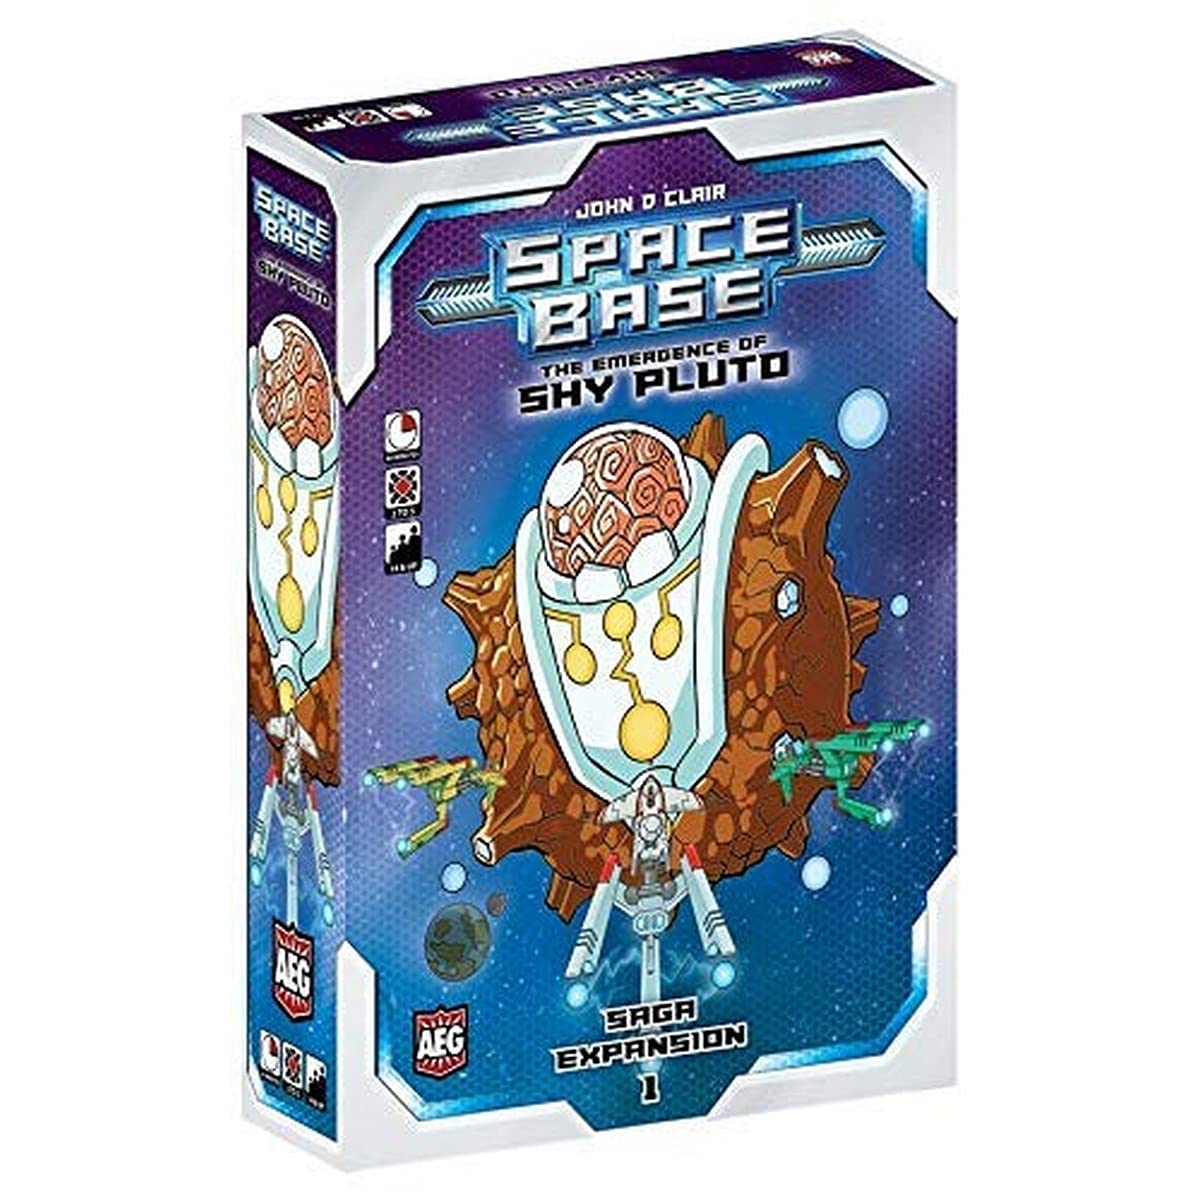 Space Base The Emergence of Shy Pluto Expansion -AEG, Board Game, Dice Game, Play The Story, Stop The Planet Killer, Discover The Secrets, 2 to 5 Players, 60 Minute Play Time, for Ages 14 and Up